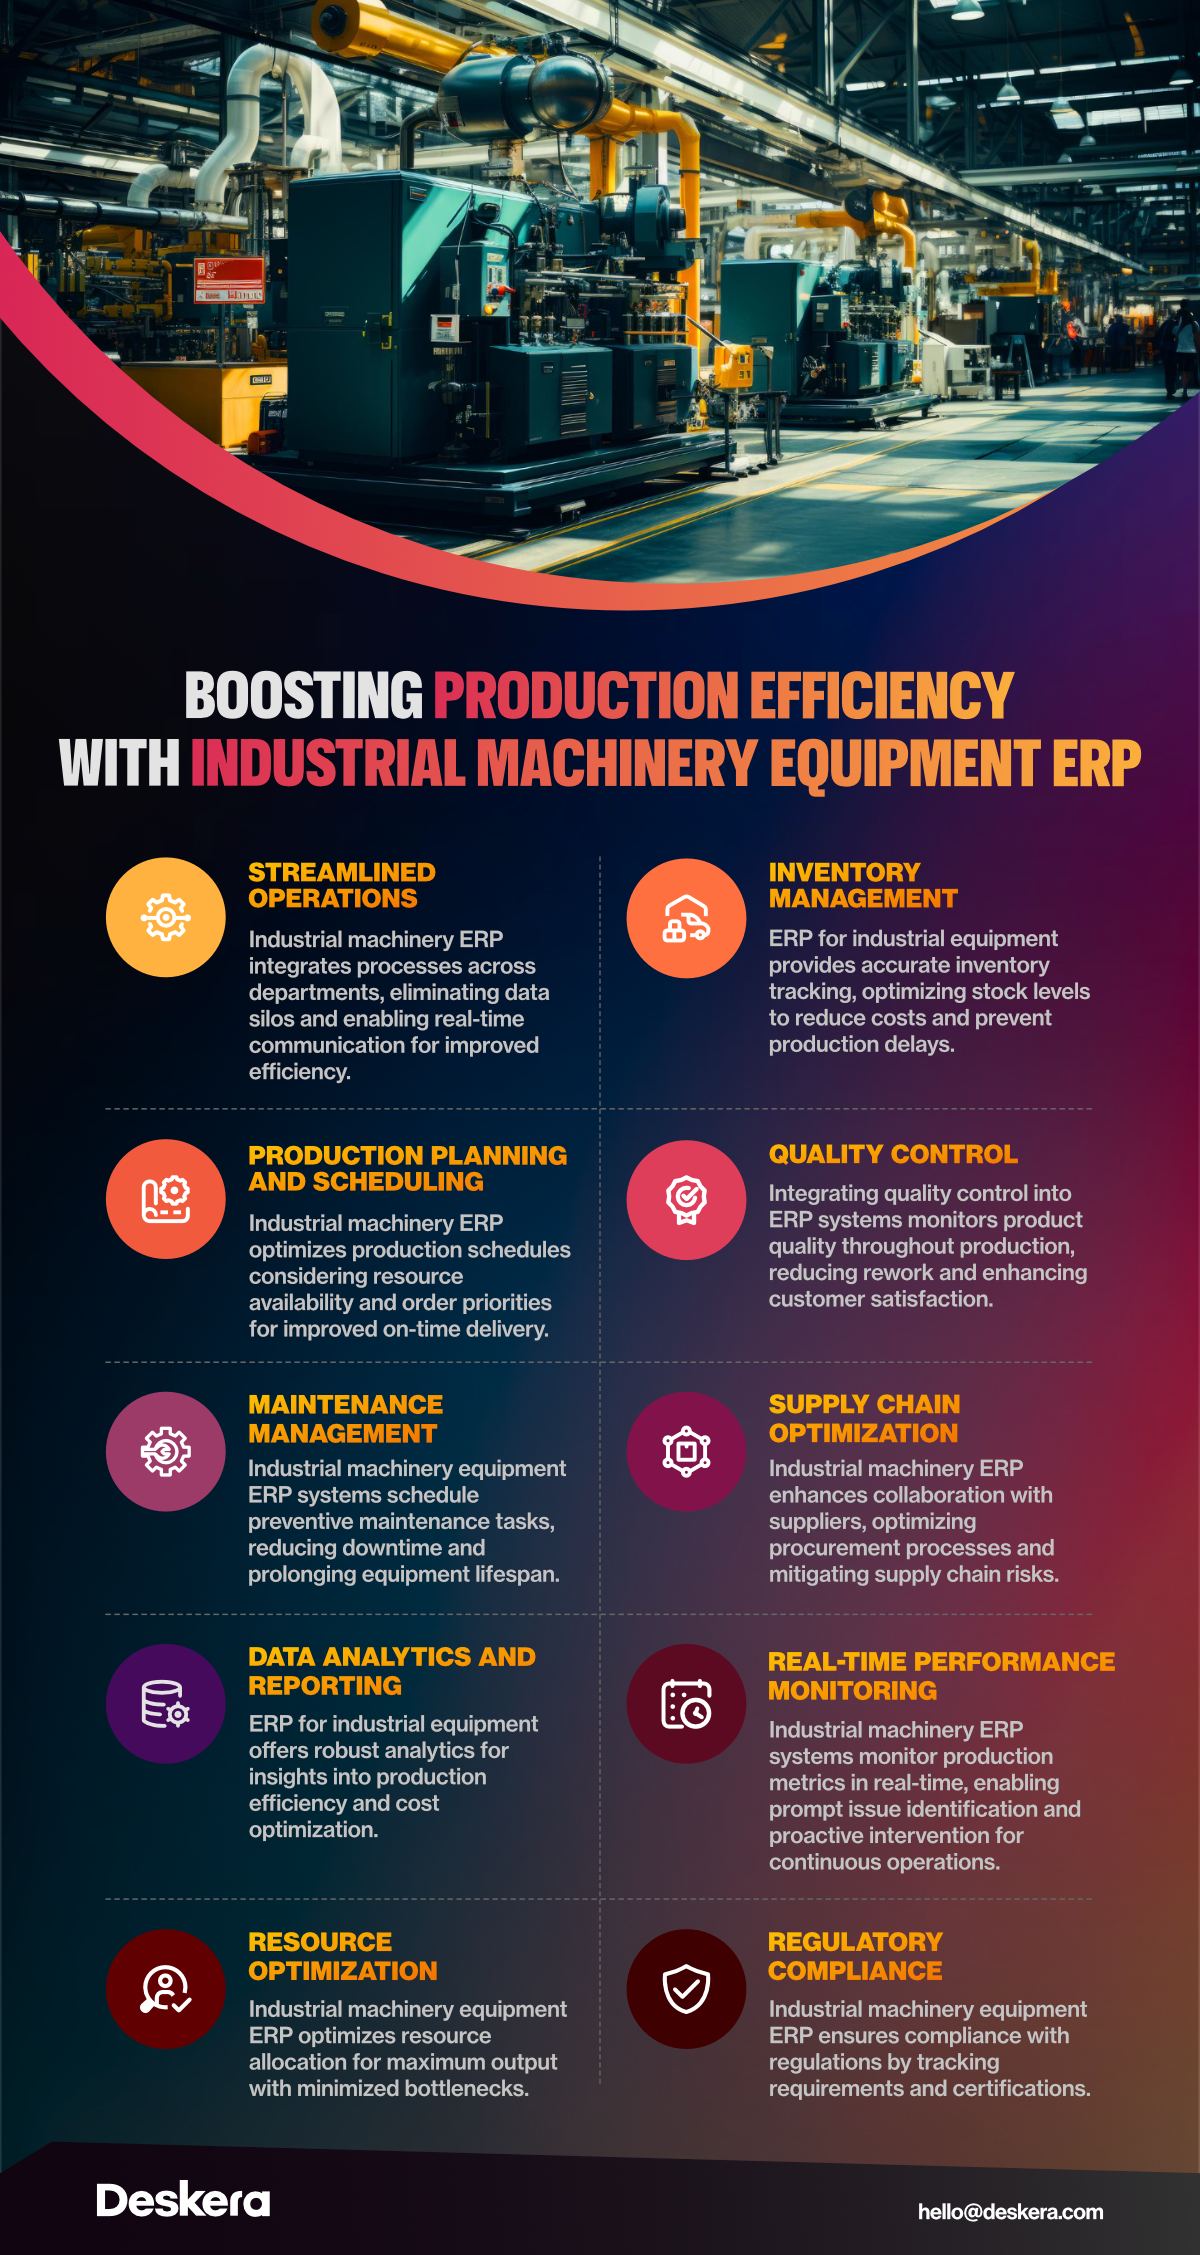 Industrial machinery equipment ERP helps in boosting production efficiency through data analytics and reporting, real-time performance monitoring, streamlined operations, maintenance management, and more